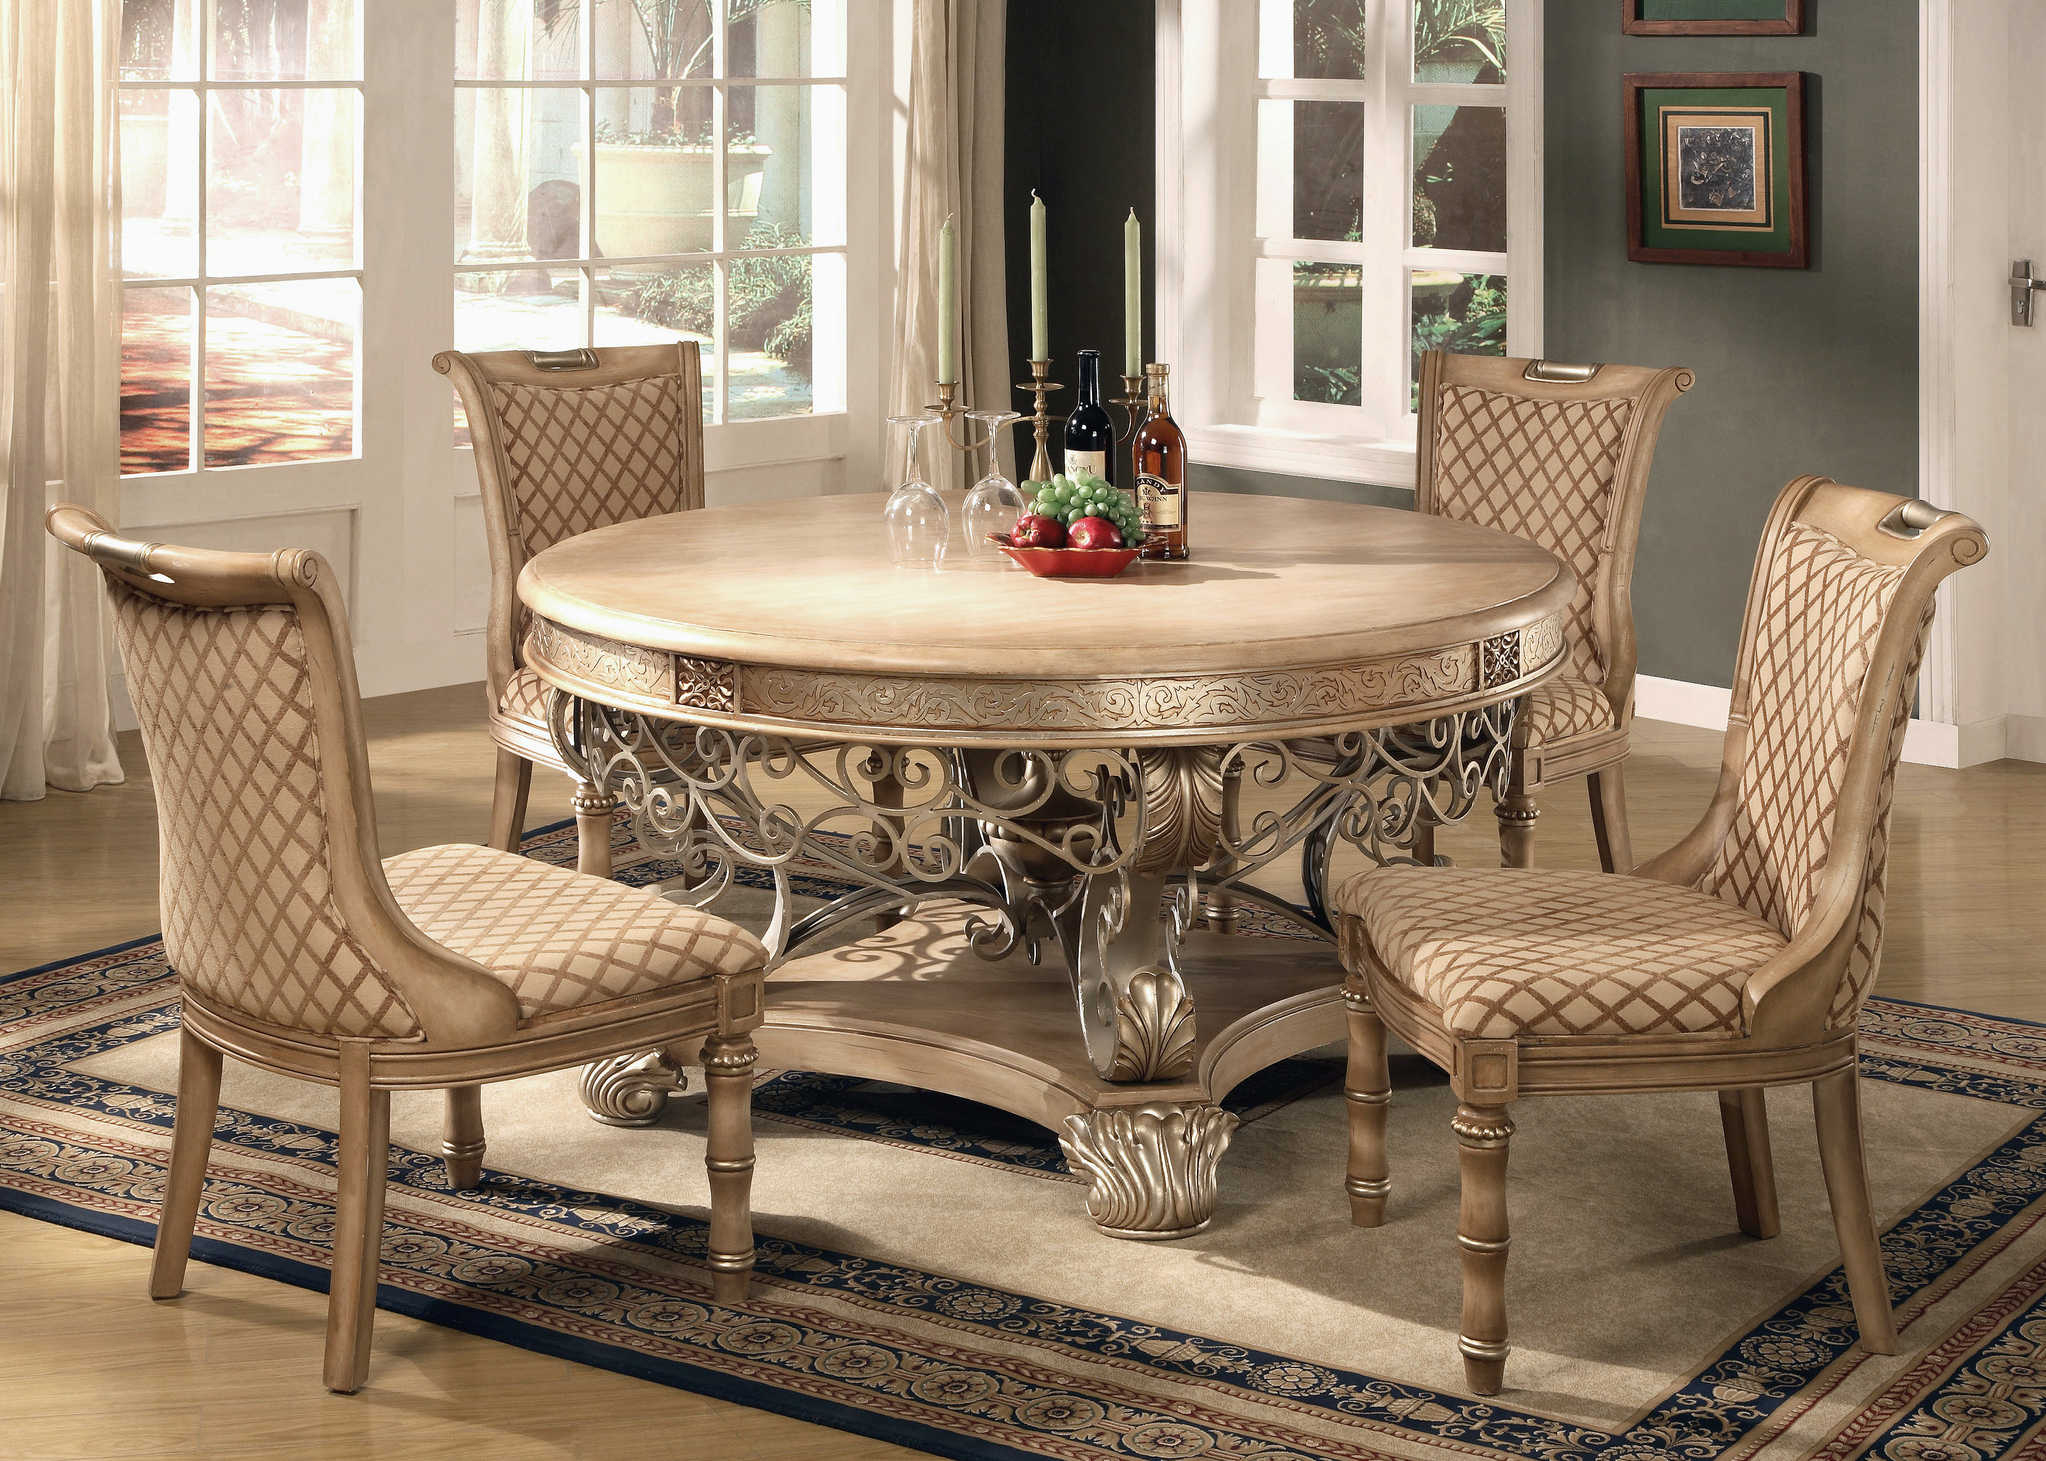 Dining Room Table And Chairs Ideas With Images inside size 2046 X 1461